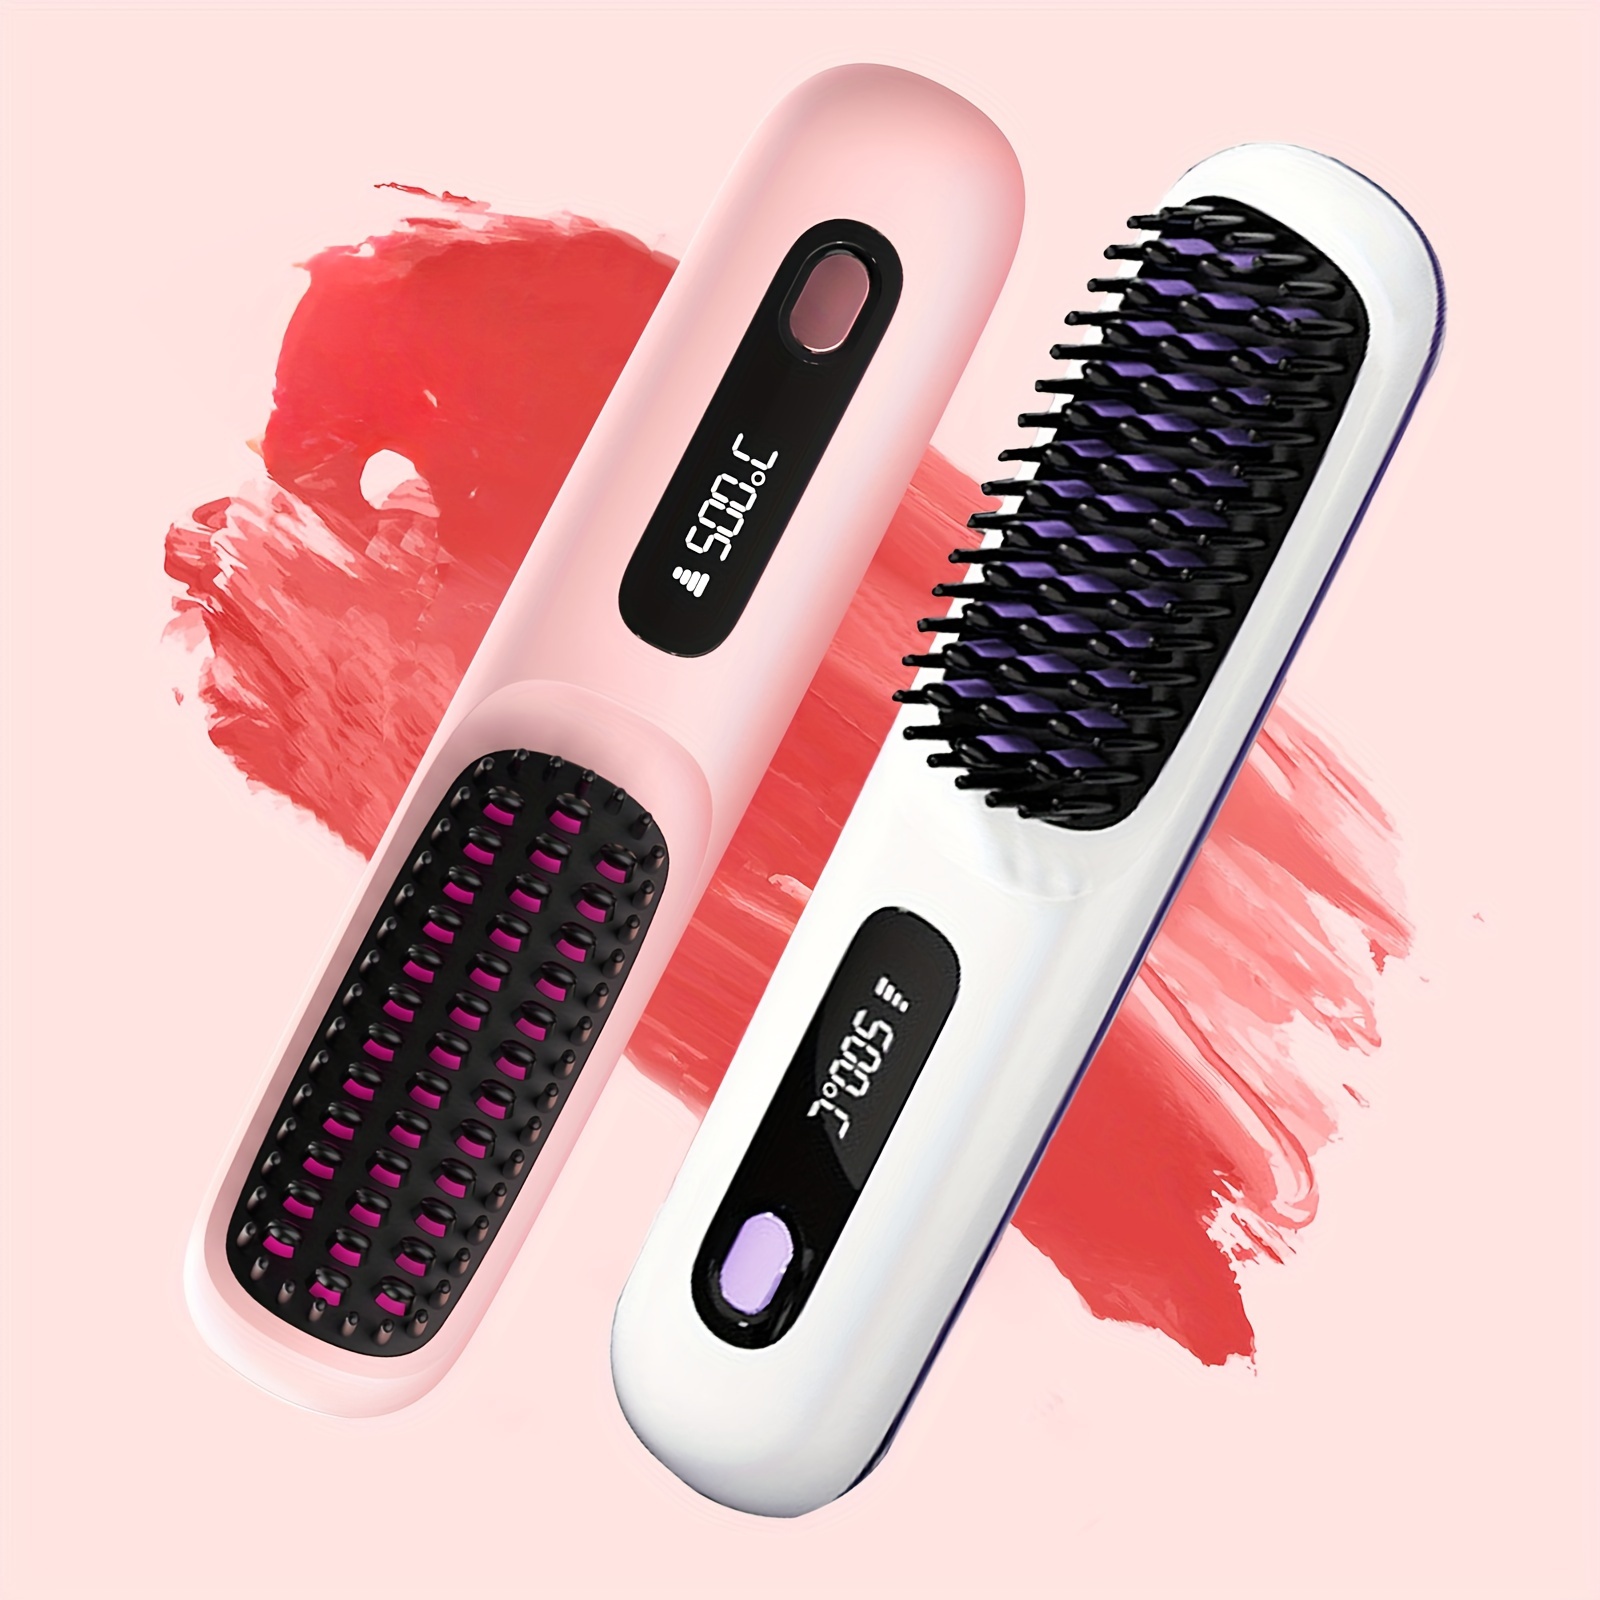 

Portable Professional Hair Straightener Brush With 3 Heat Levels For Fast Heating And Smooth Straightening - Perfect For Hair Care